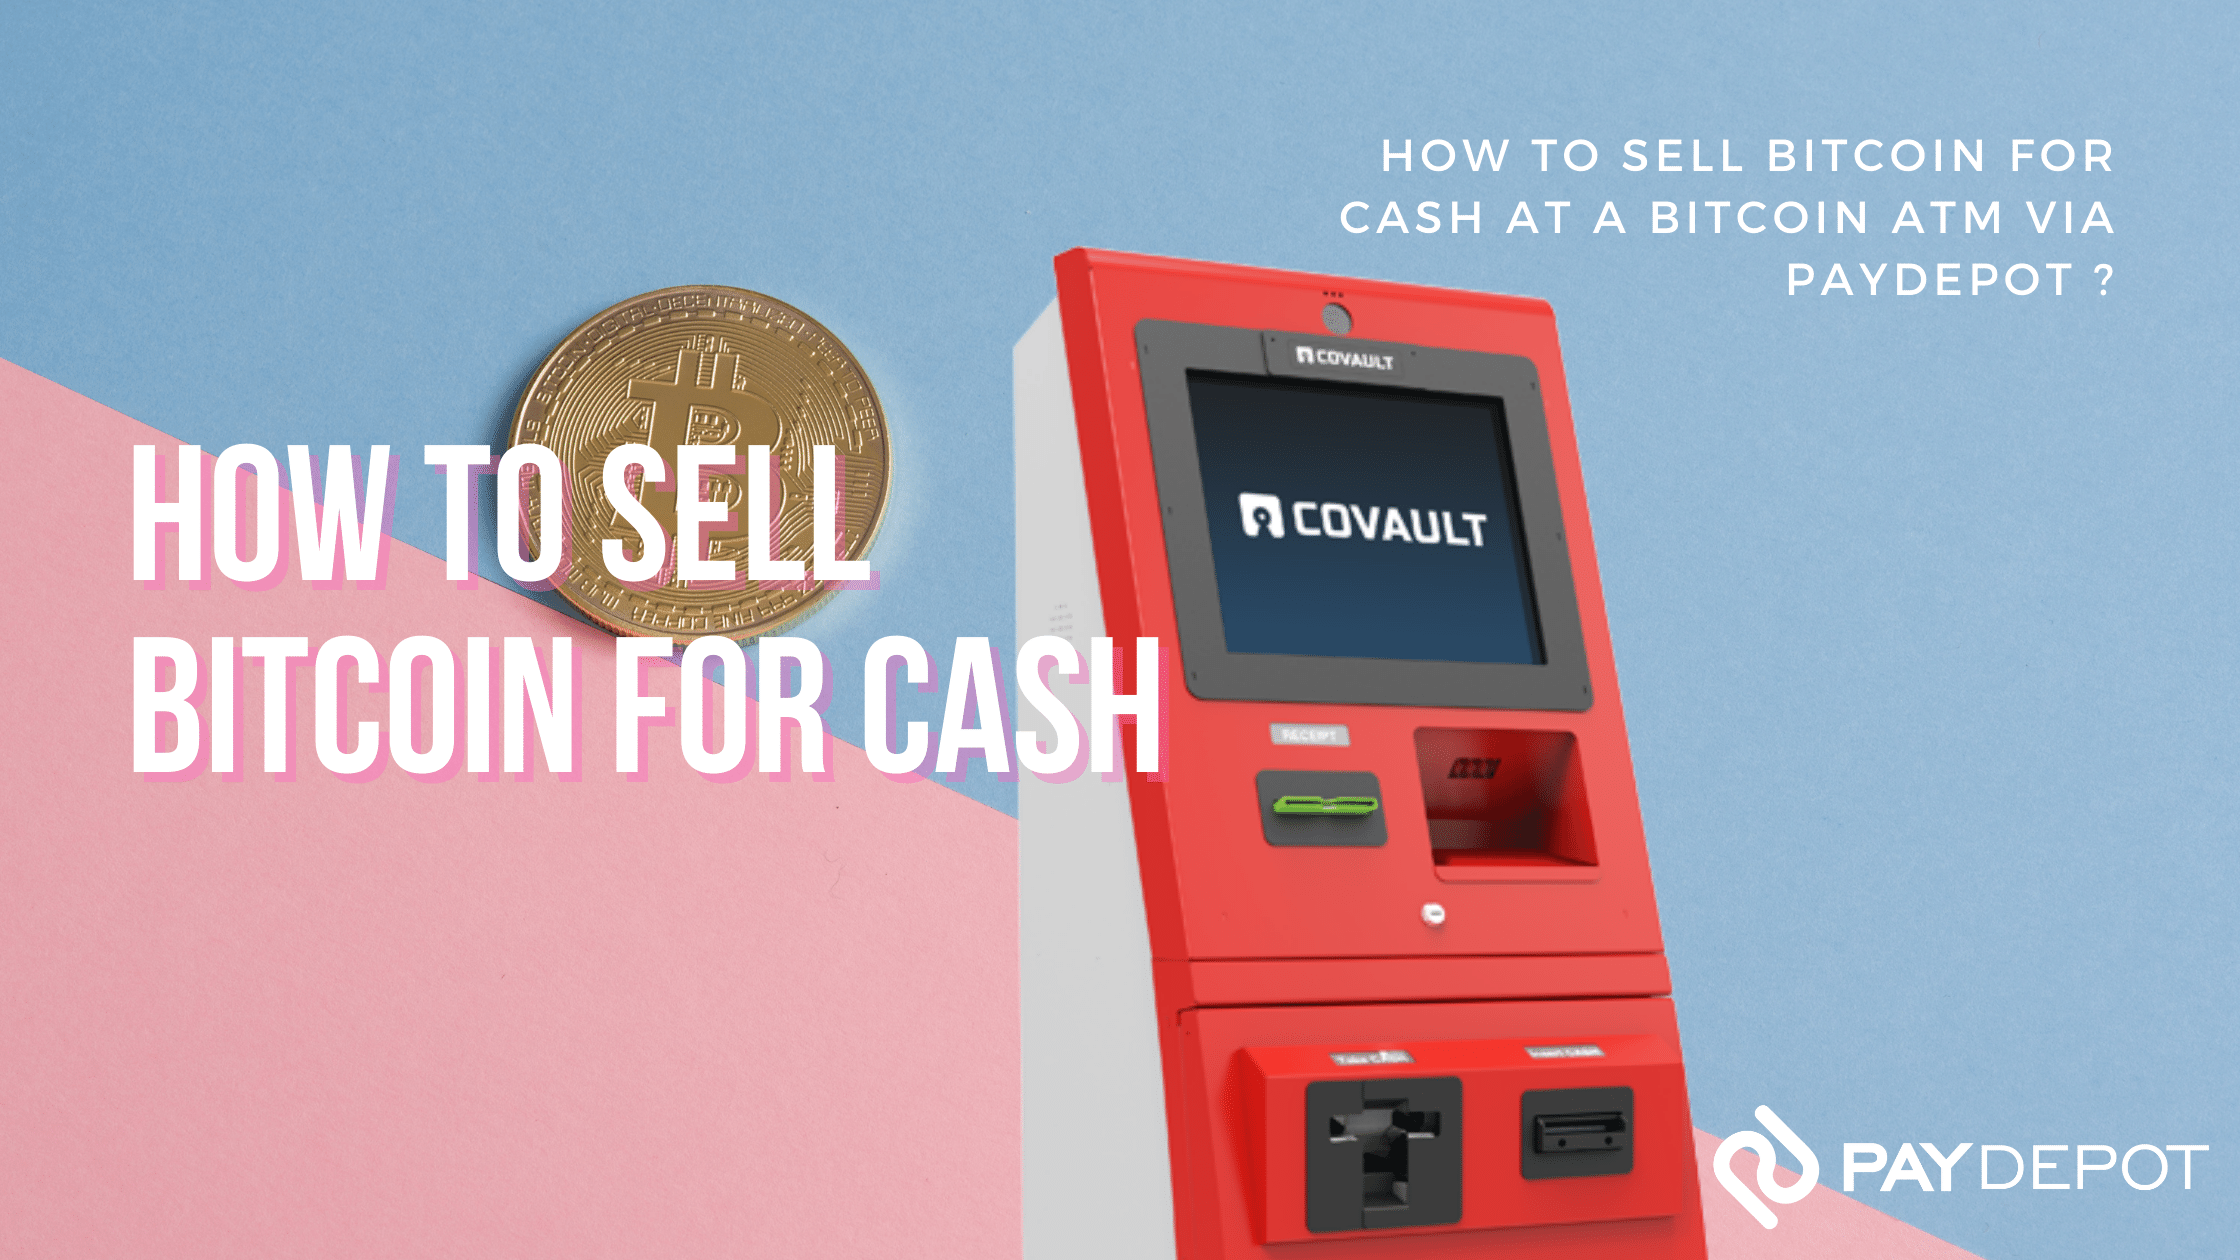 Sell Bitcoin for Cash at a Bitcoin ATM with Paydepot